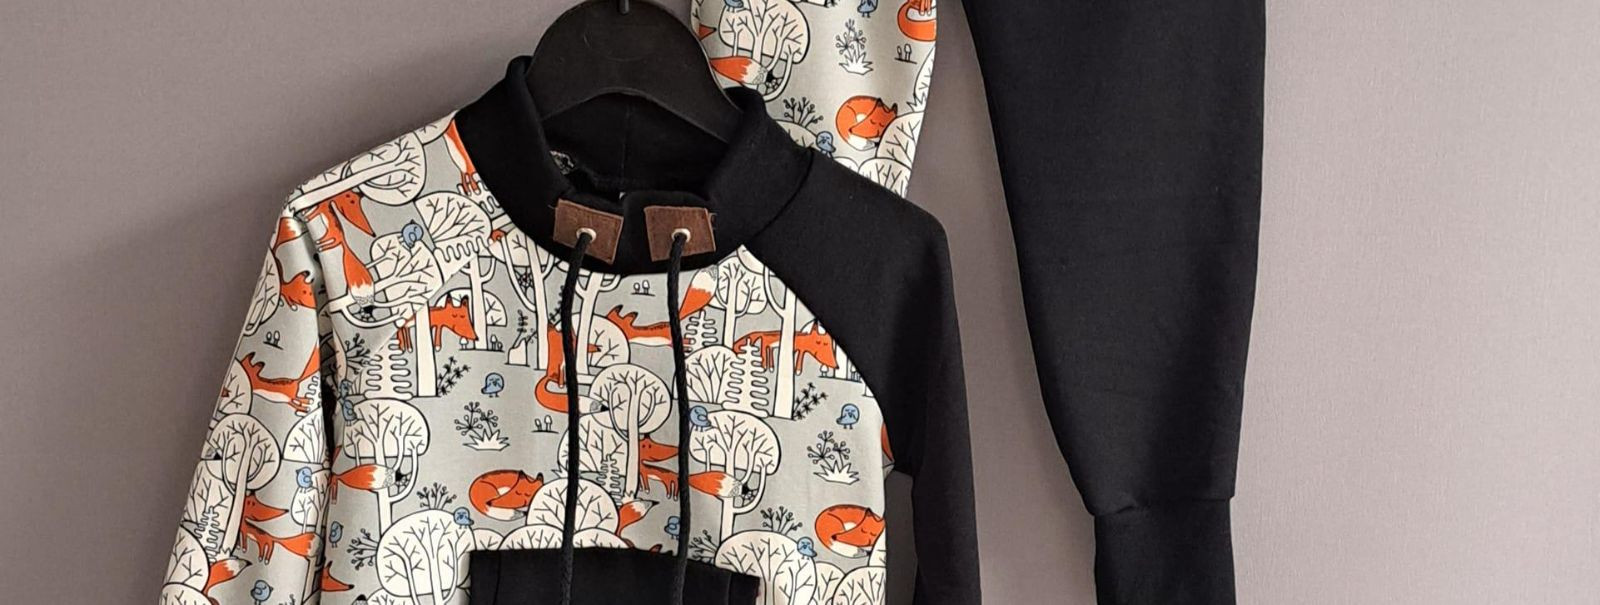 Handmade children's clothing is a growing trend among parents who value quality, sustainability, and originality. Unlike mass-produced garments, handmade clothi